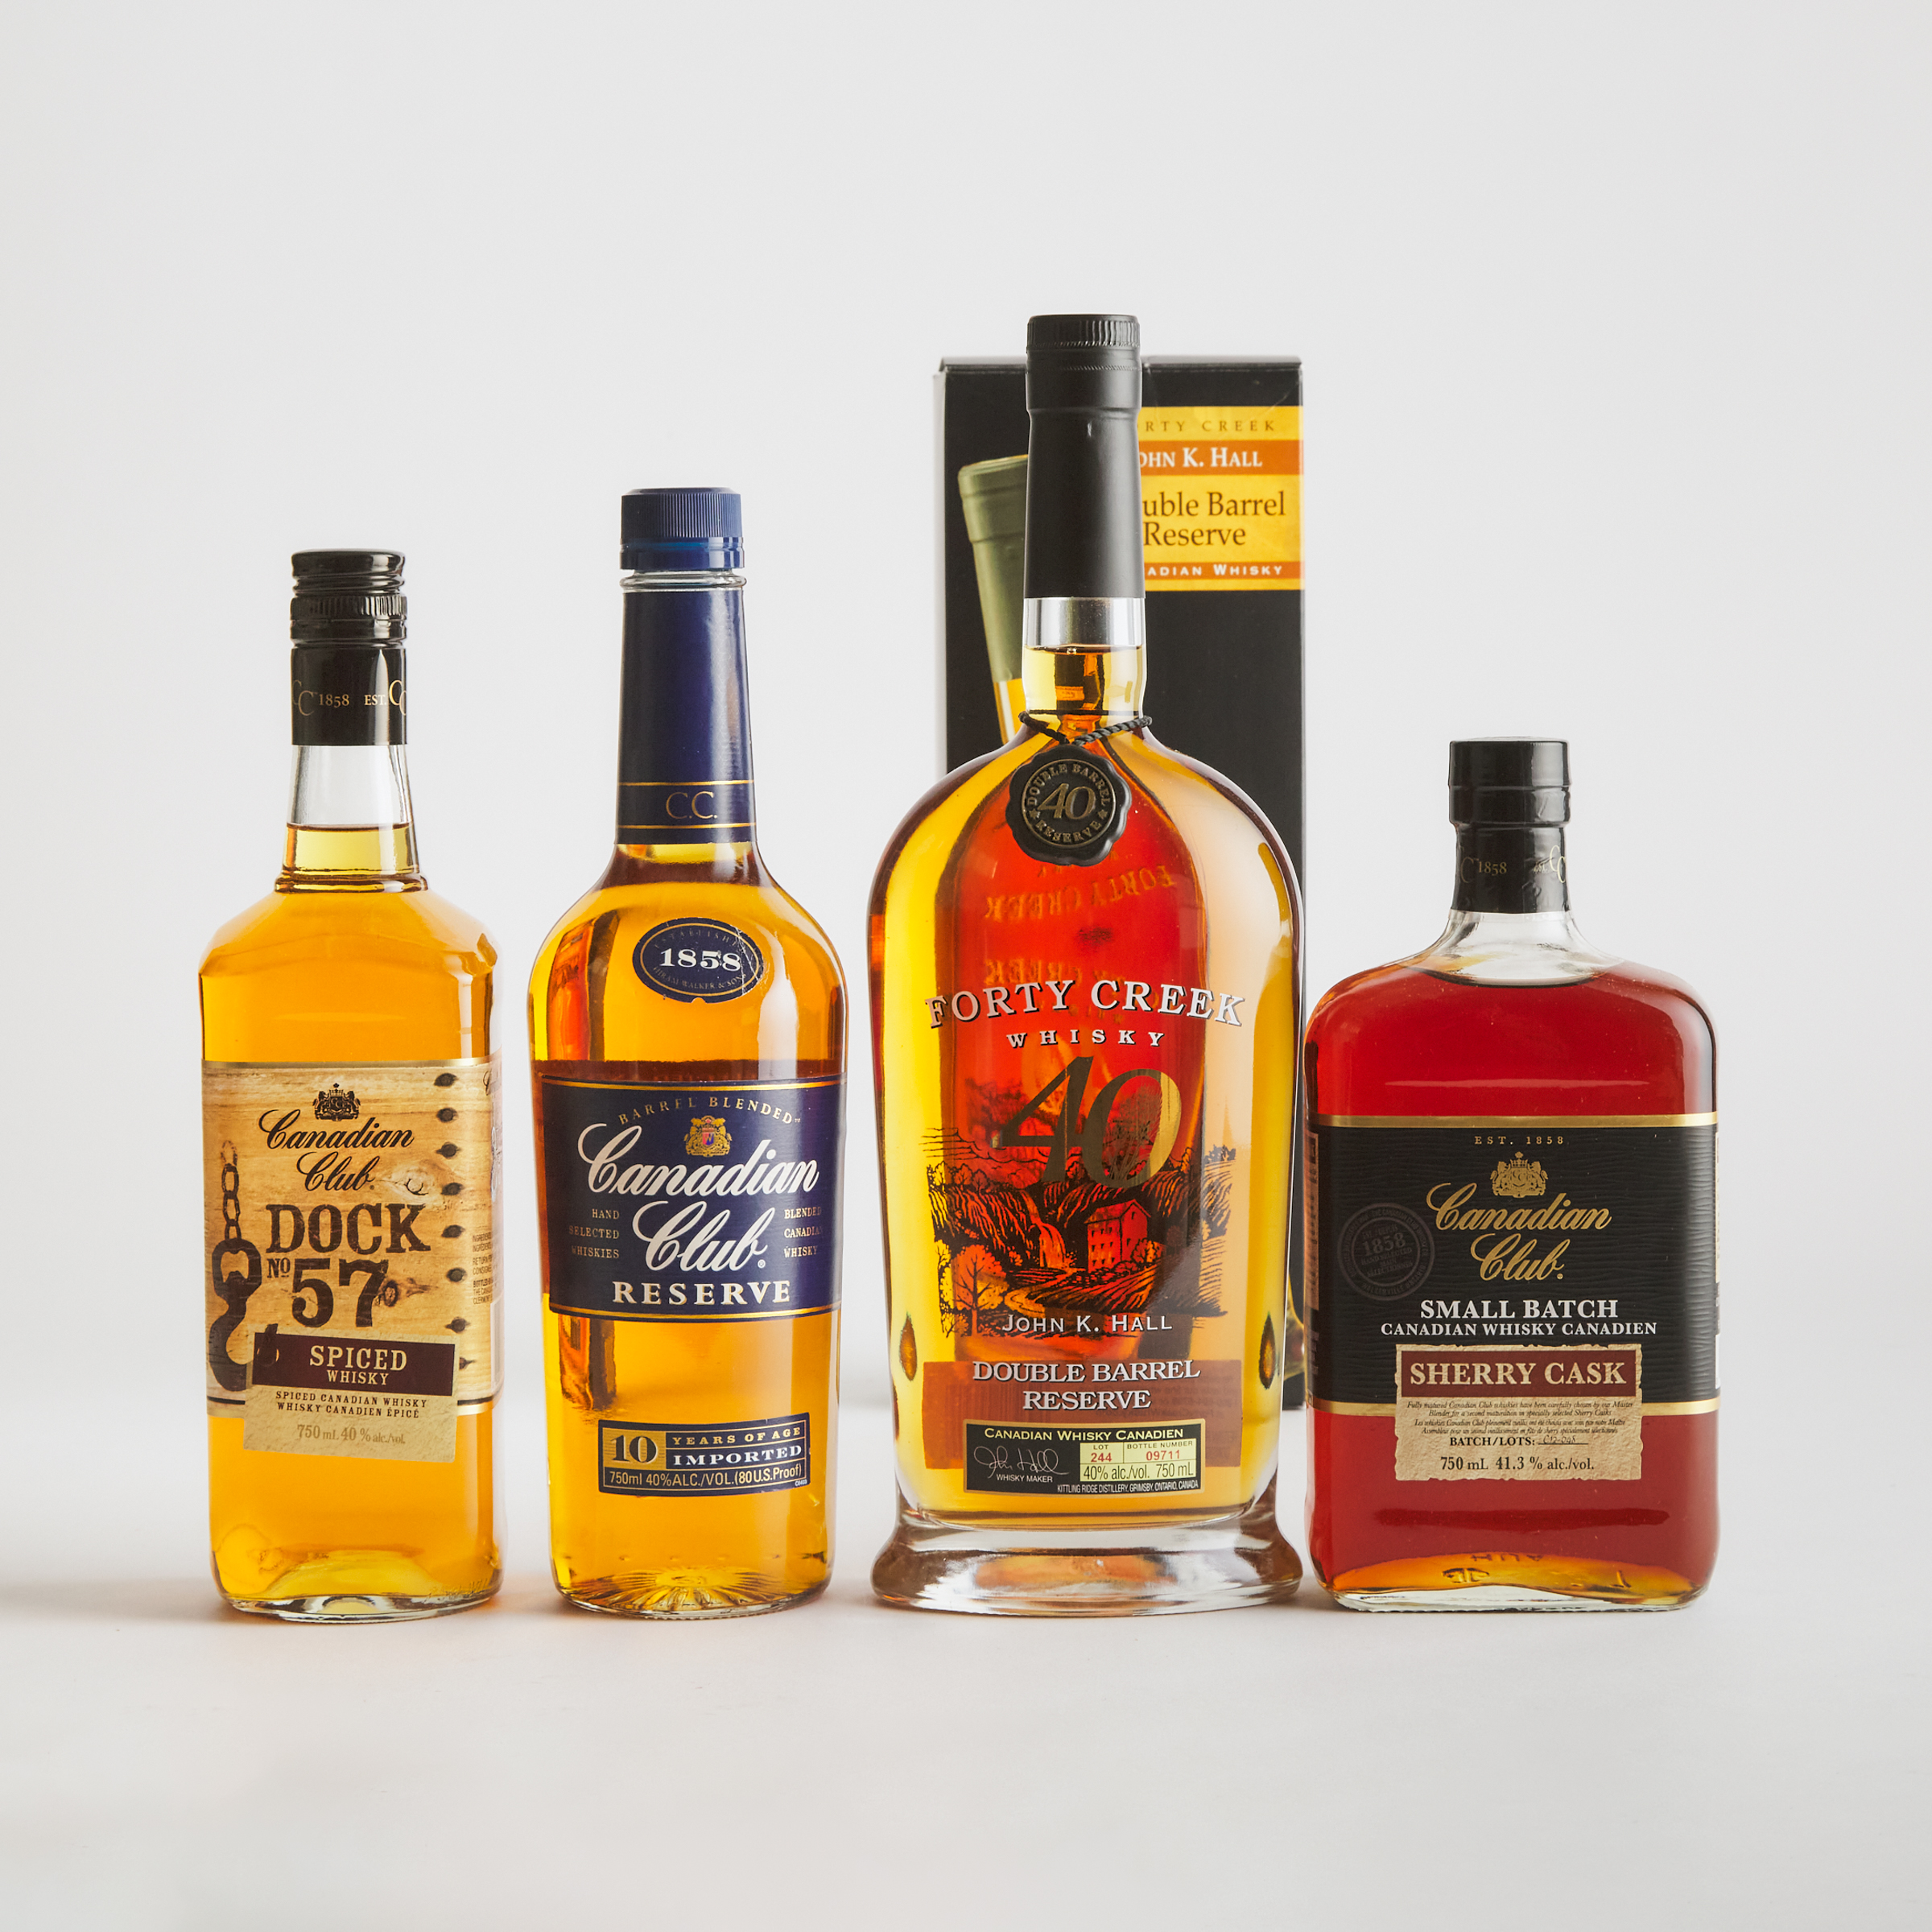 CANADIAN CLUB CANADIAN WHISKY NAS (ONE 750 ML)CANADIAN CLUB CANADIAN WHISKY NAS (ONE 750 ML)CANADIAN CLUB CANADIAN WHISKY 10 YEARS (ONE 750 ML)FORTY CREEK CANADIAN WHISKY NAS (ONE 750 ML)